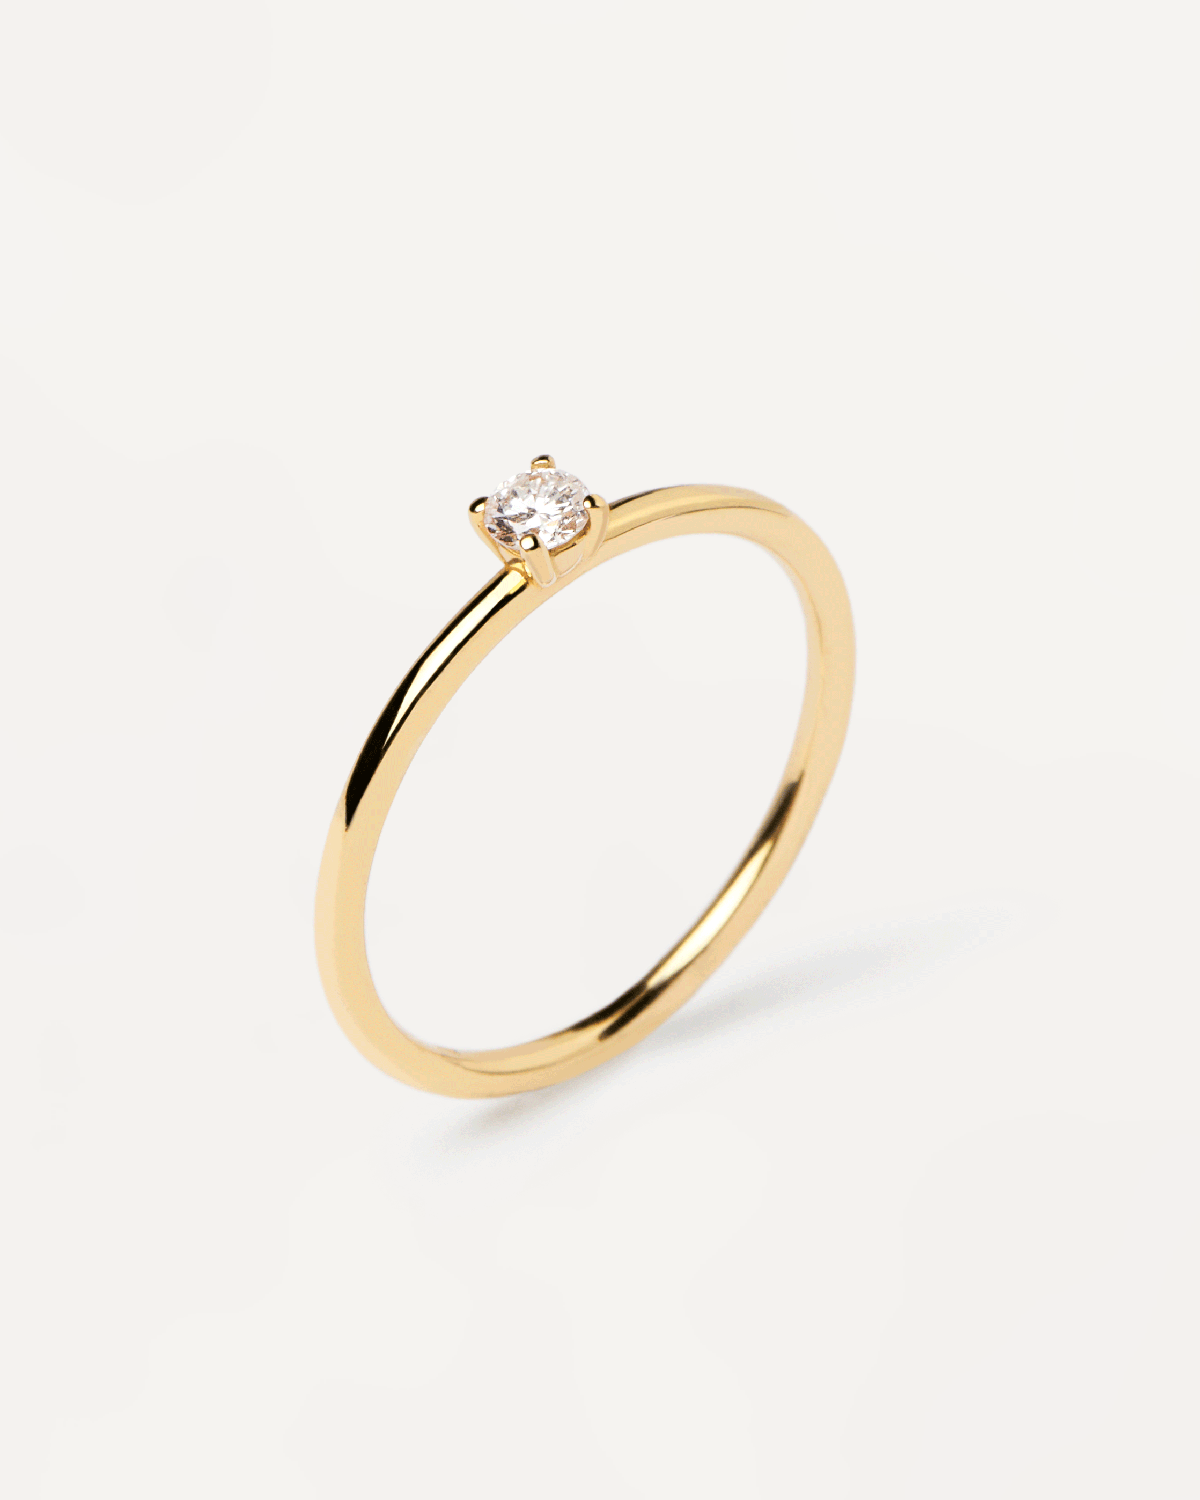 Diamonds and Yellow Gold Solitaire Mini Ring - 18K solid yellow gold